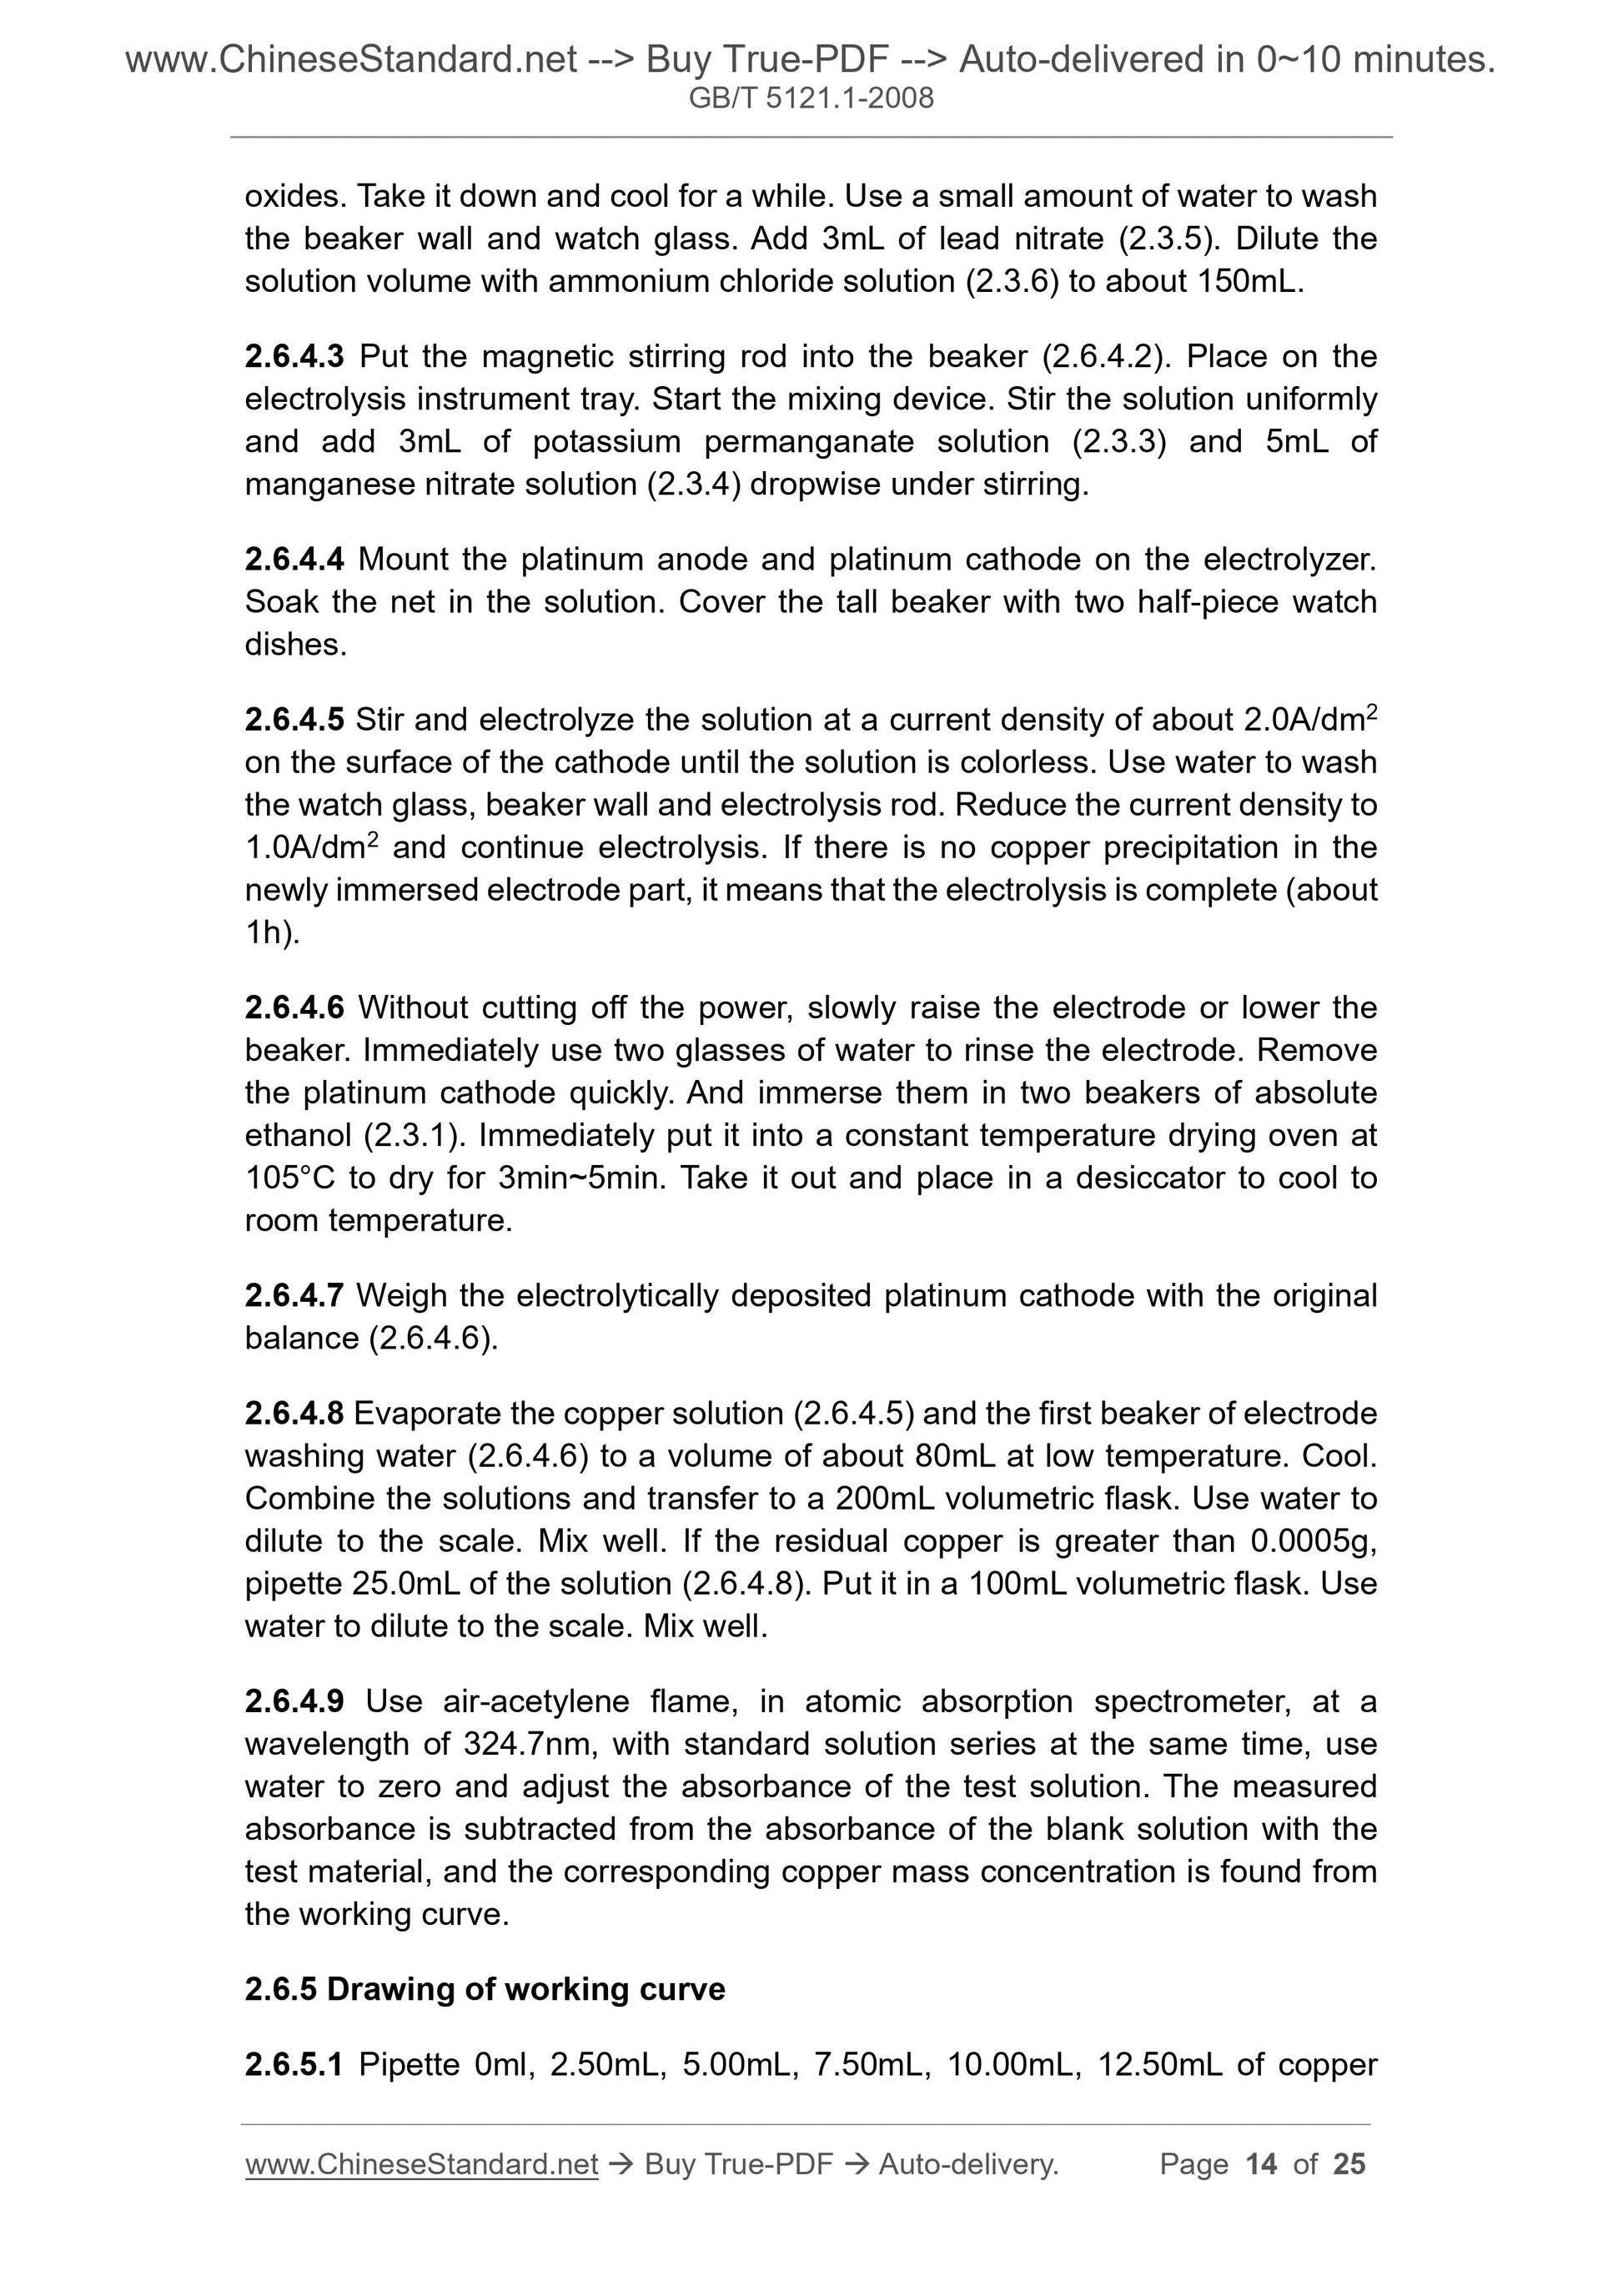 GB/T 5121.1-2008 Page 6